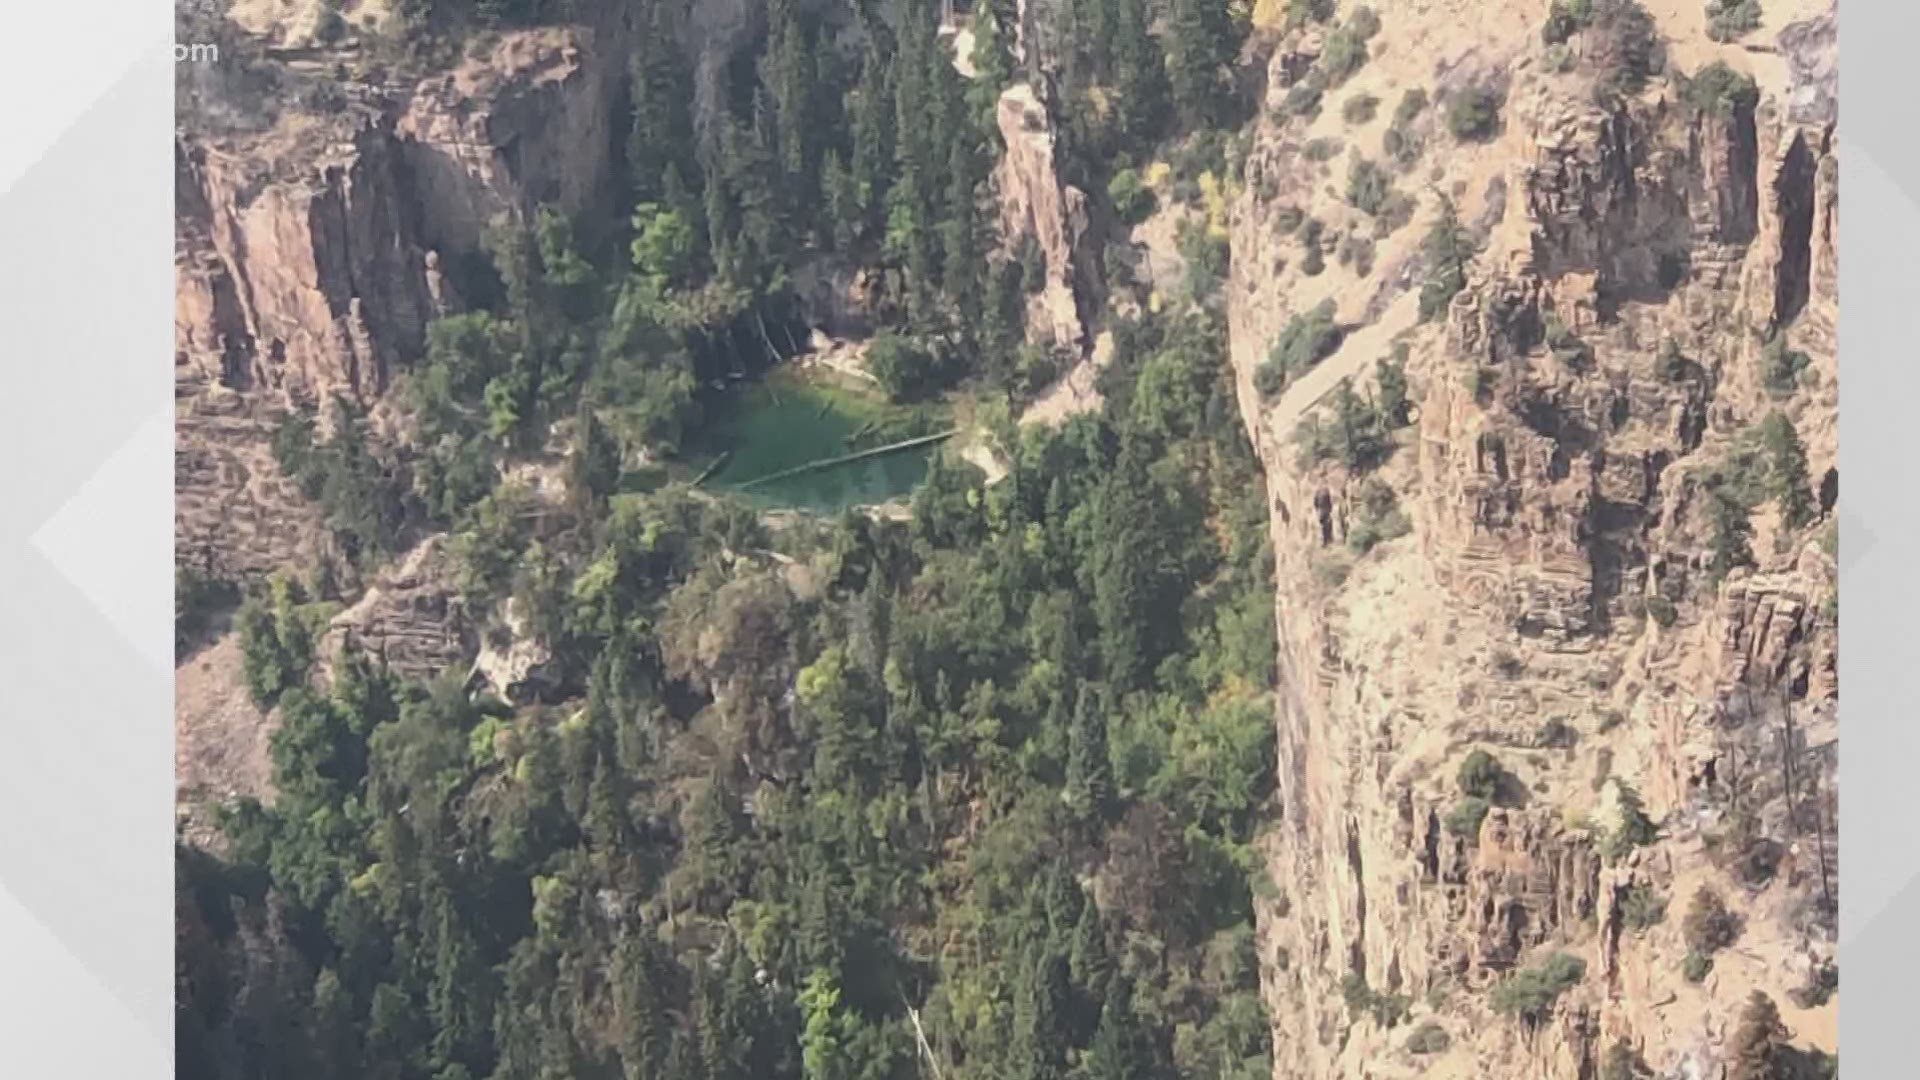 The fire burned an area above Hanging Lake as well as a lower section of the trail.